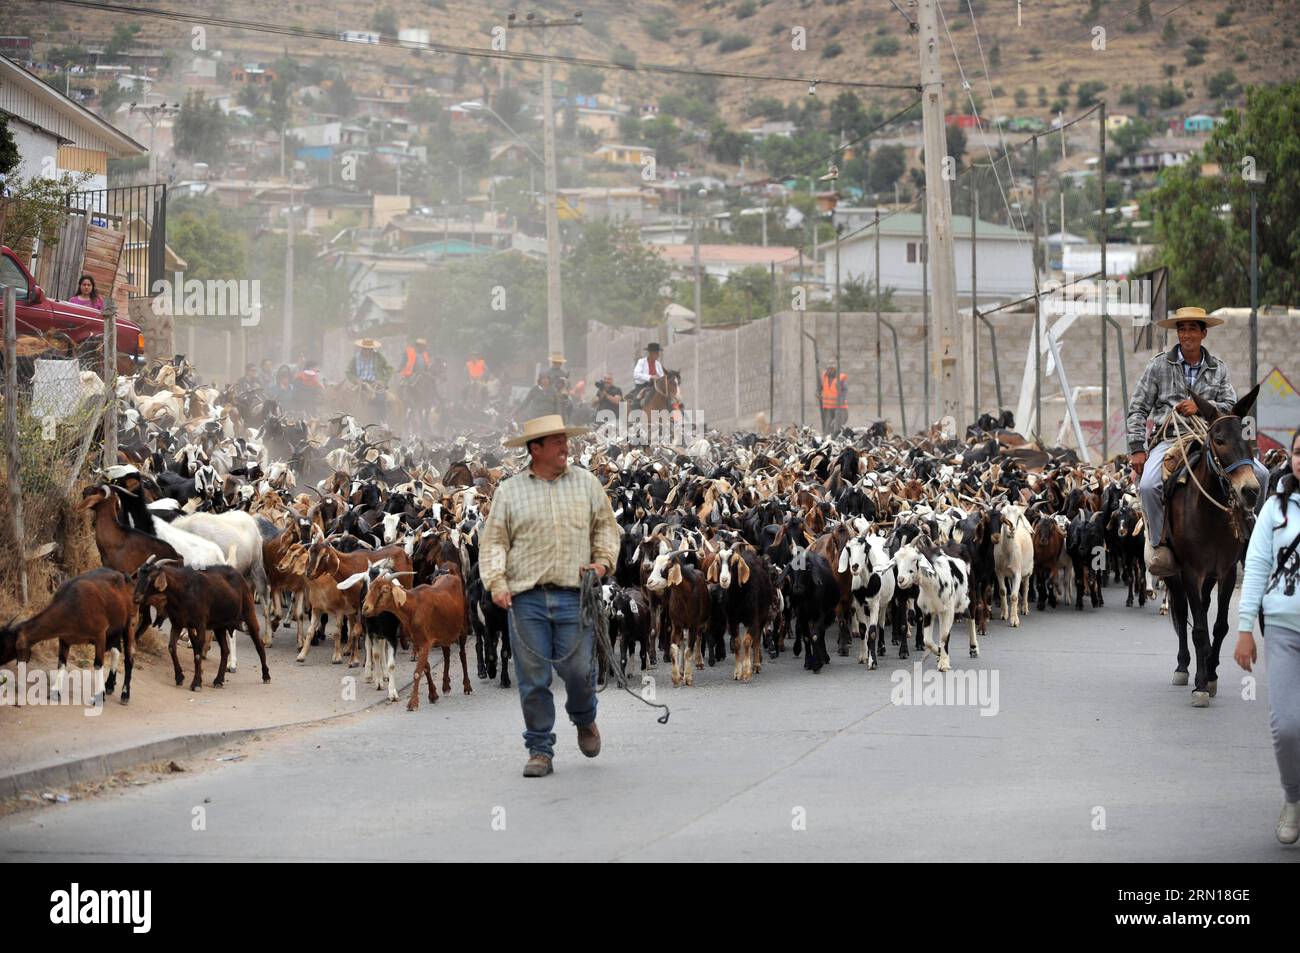 (141206) -- ILLAPEL, Dec. 6, 2014 () -- Horsemen escort a goat herd during a ceremony commemorating the Transhumance and Goat Herdsman Day, in Illapelm of Coquimbo Region, Chile, on Dec. 5, 2014. The Transhumance and Goat Herdsman Day, is a holiday that attracts hundreds of visitors with its unique features, as herdsmen walk through city with their animals being dismissed by community leaving to summer grazing in range sectors. The holiday was decreed in 2011 by Illapel s Mayor, Denis Cortes Vargas, aiming to recognize the importance of the herdsman job to local identity and has call for the a Stock Photo